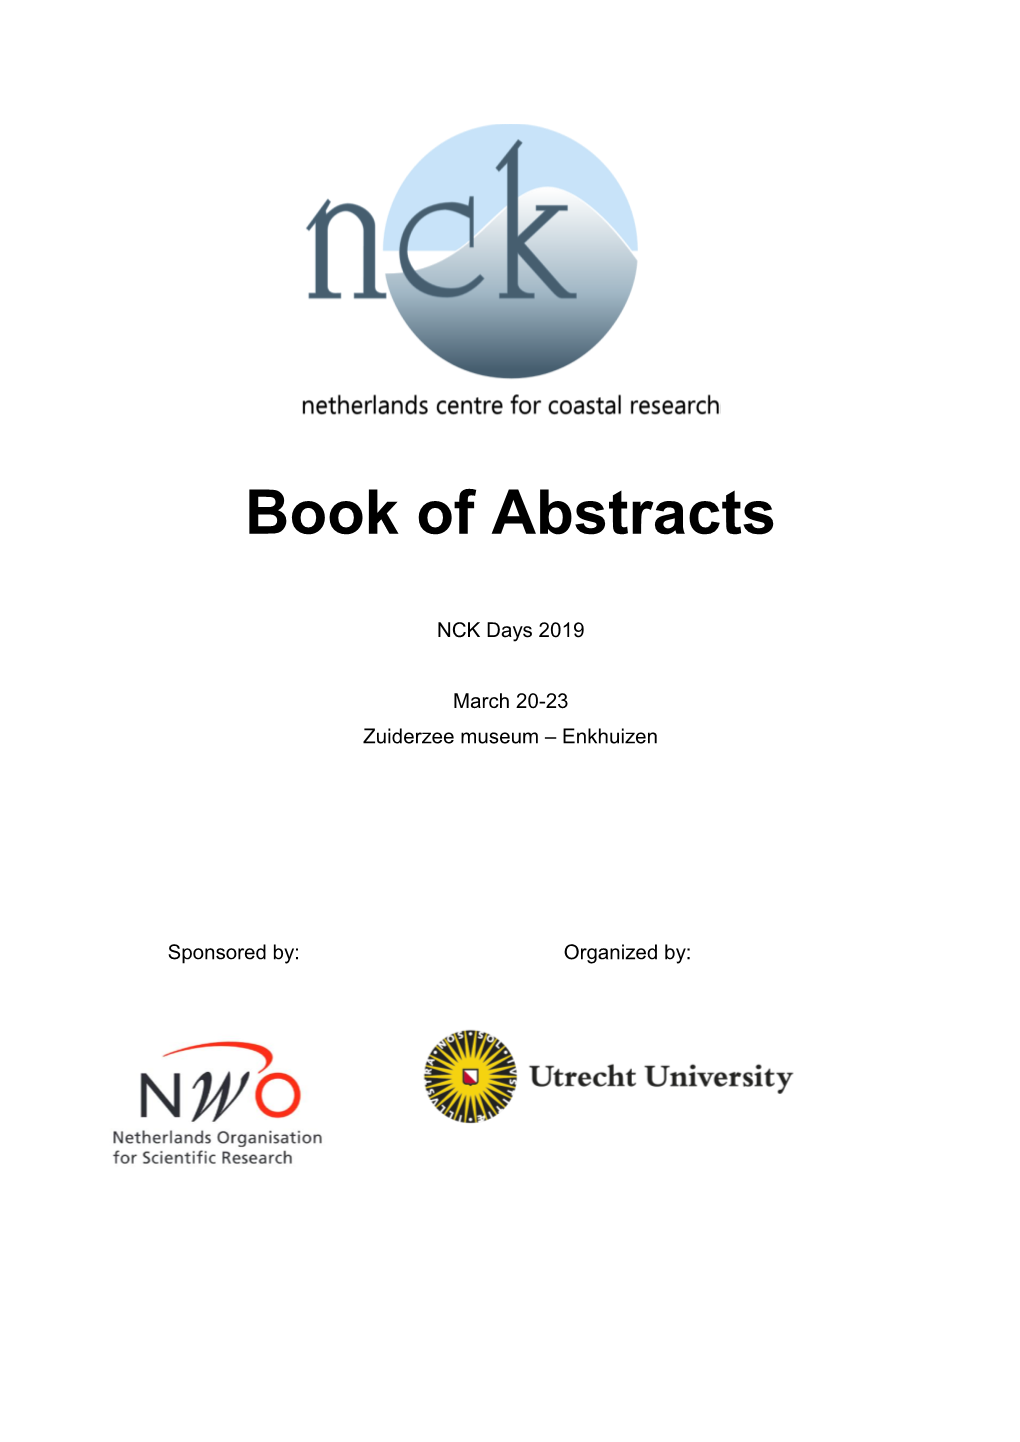 Book of Abstracts 2019